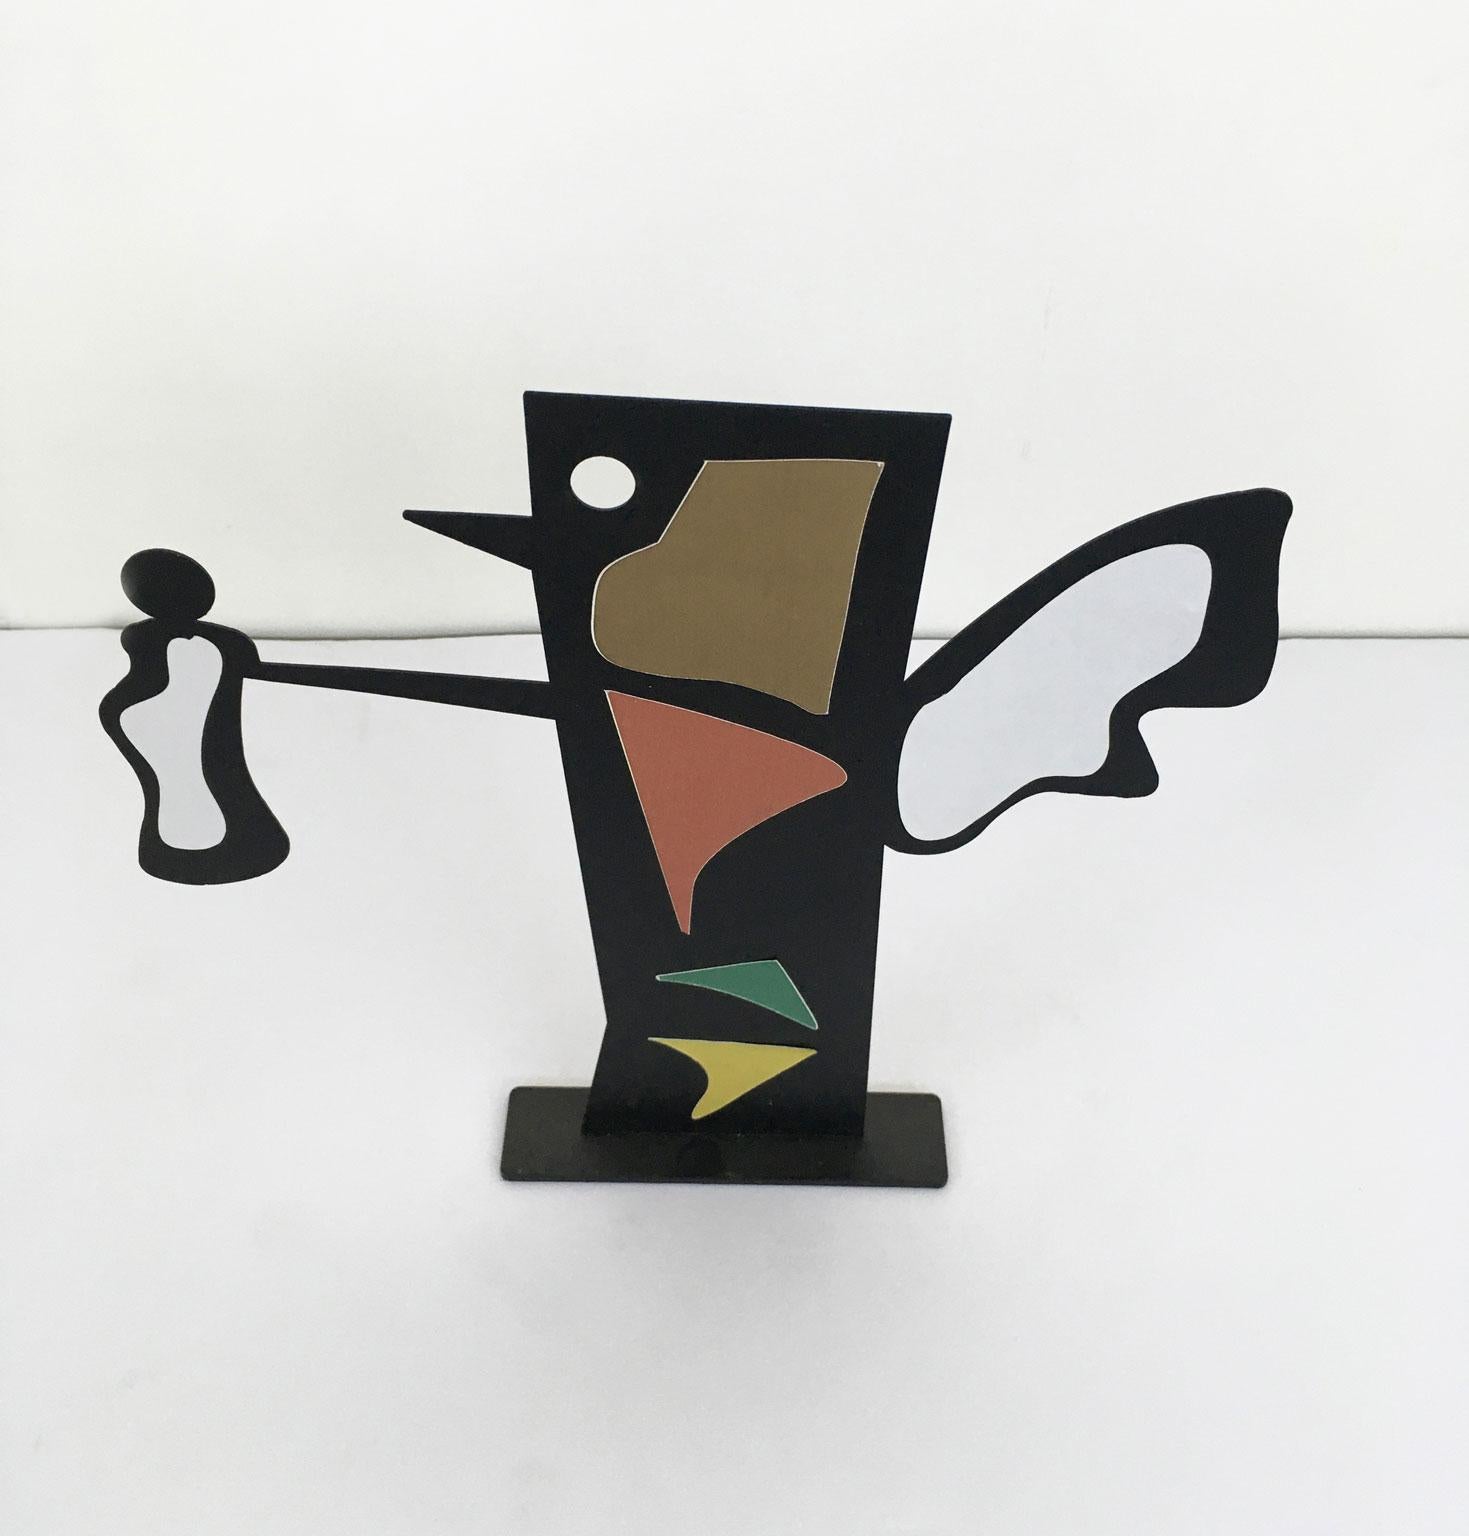 Italy 1980 Riccardo Dalisi Black Metal Painted Sculpture Caffellatte For Sale 2